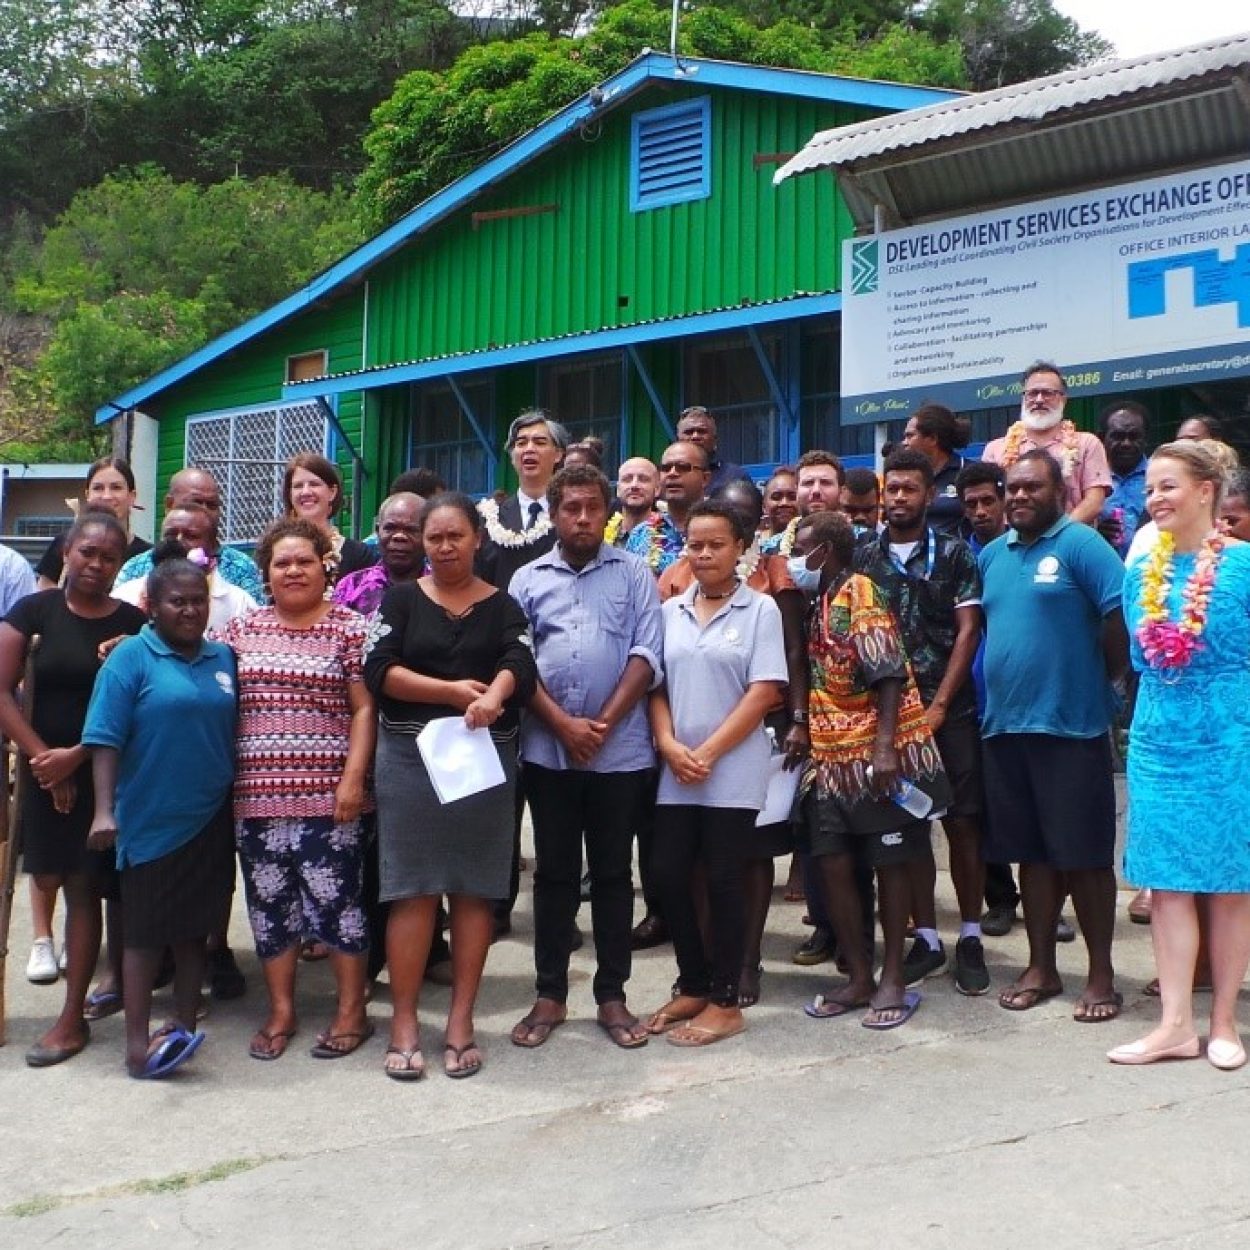 A group of people pose for a photo outside a green and blue office building in Solomon Islands.